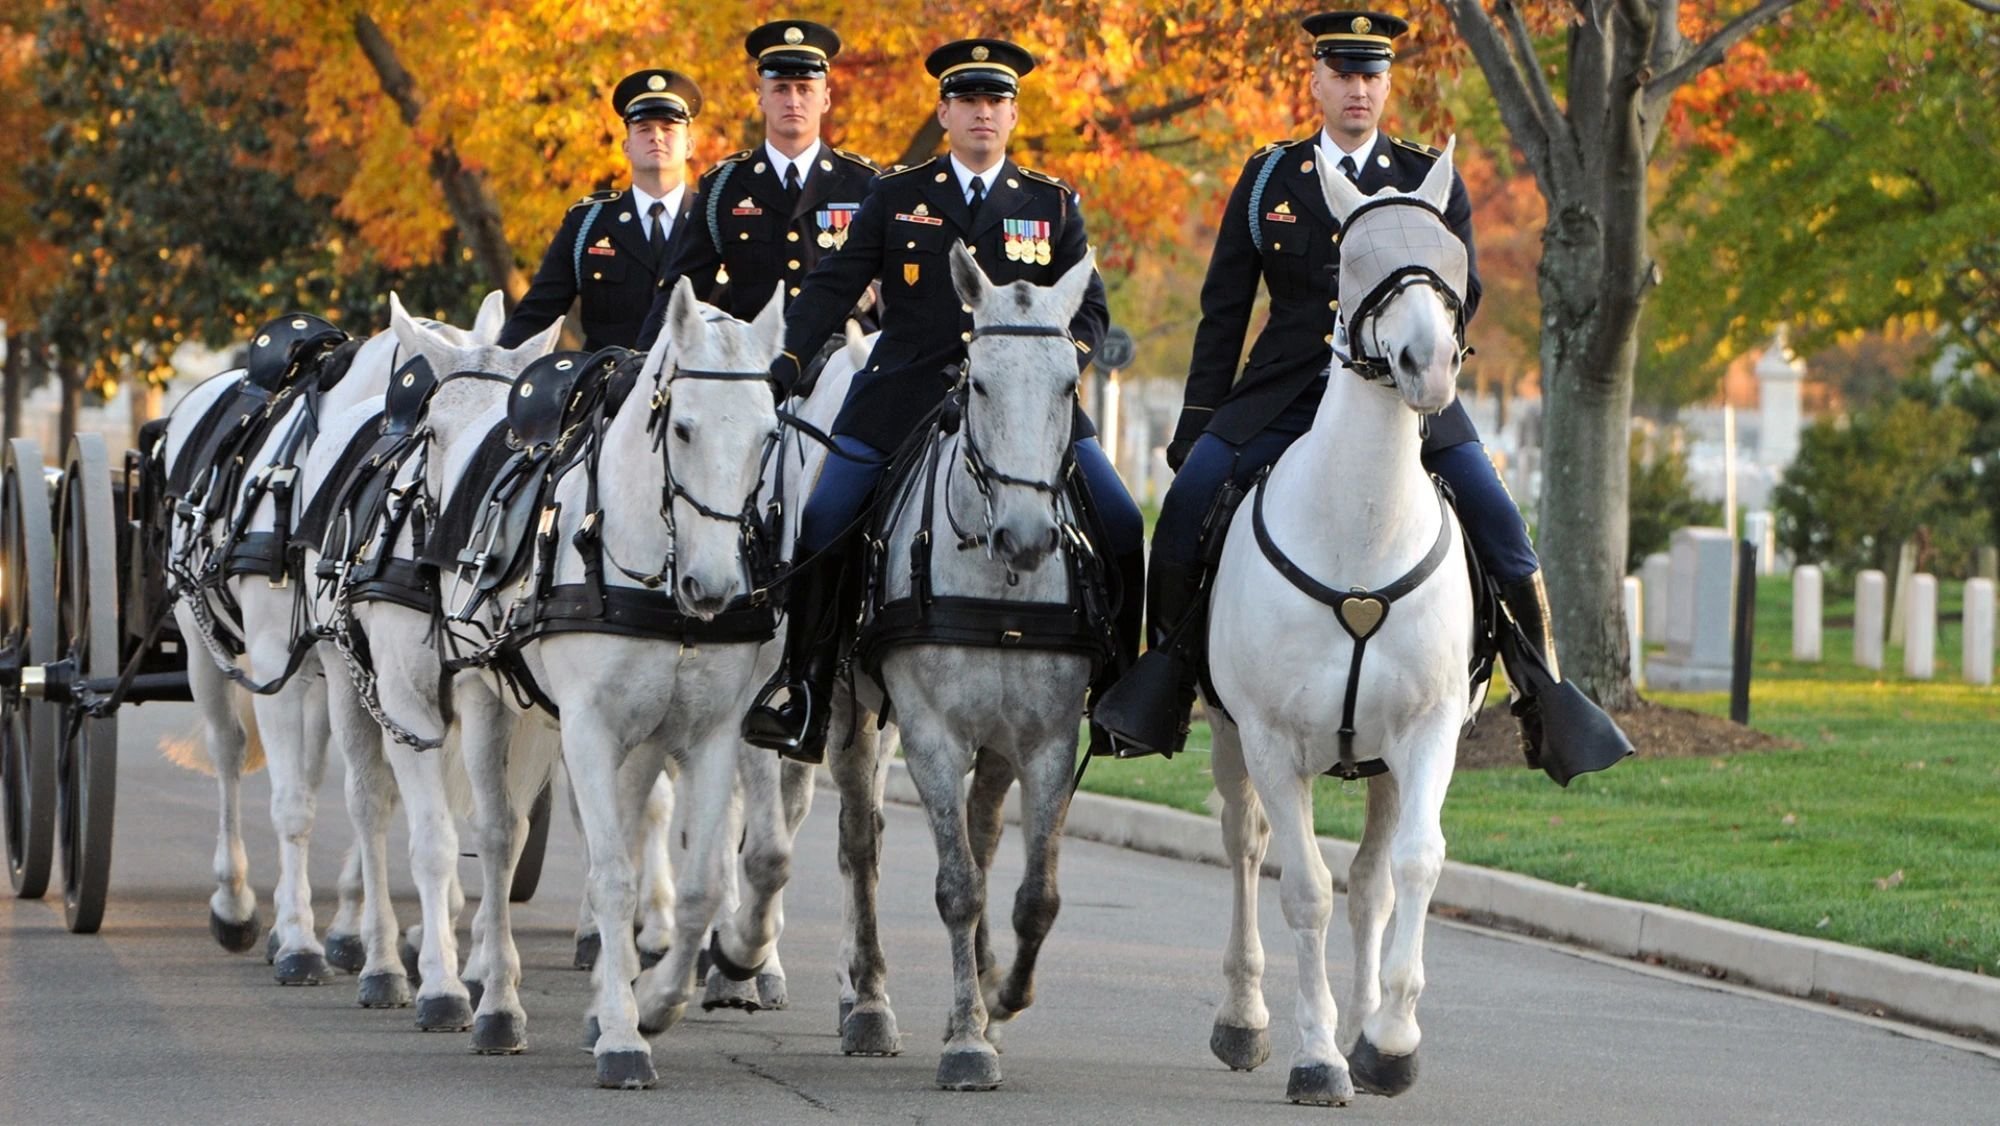 Caisson Platoon participates in all Army, Air Force, and Marine Corps full-honors funerals performed in Arlington National Cemetery. When the horses retire, they’re adopted out. US Army photo.